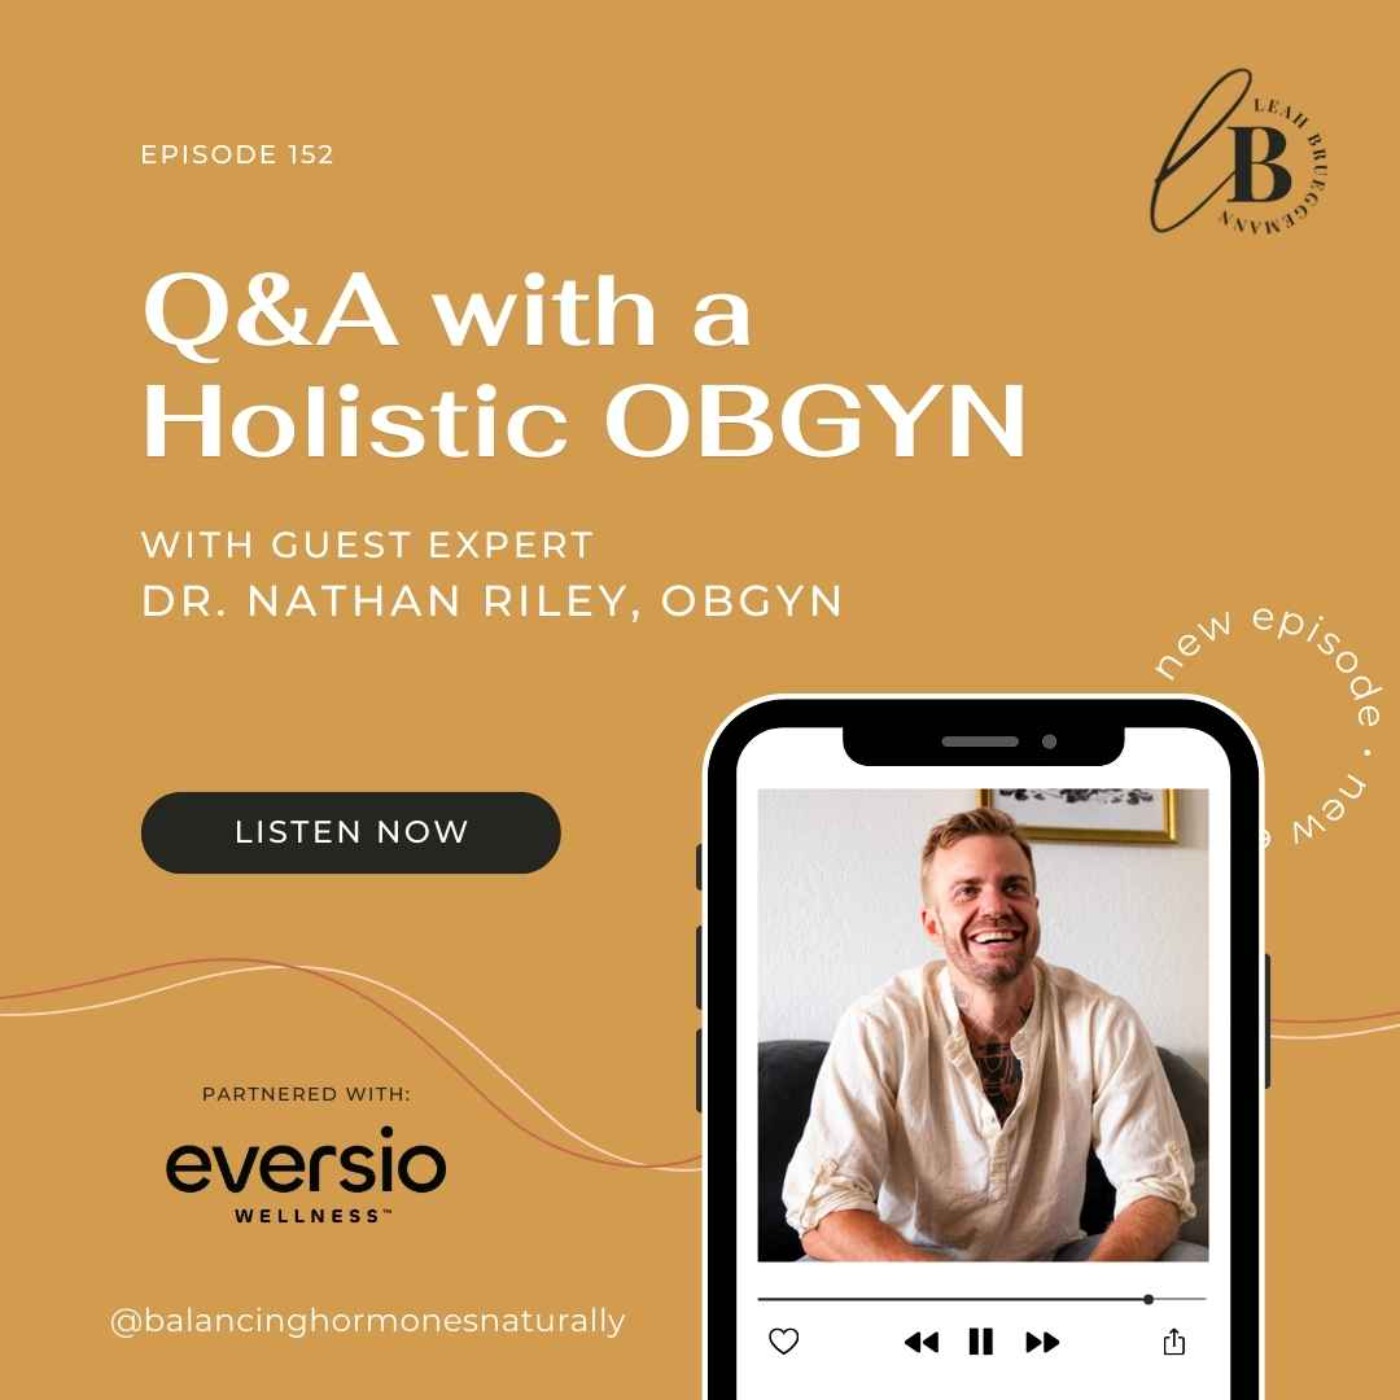 Episode 152: Q&A with a Holistic OBGYN